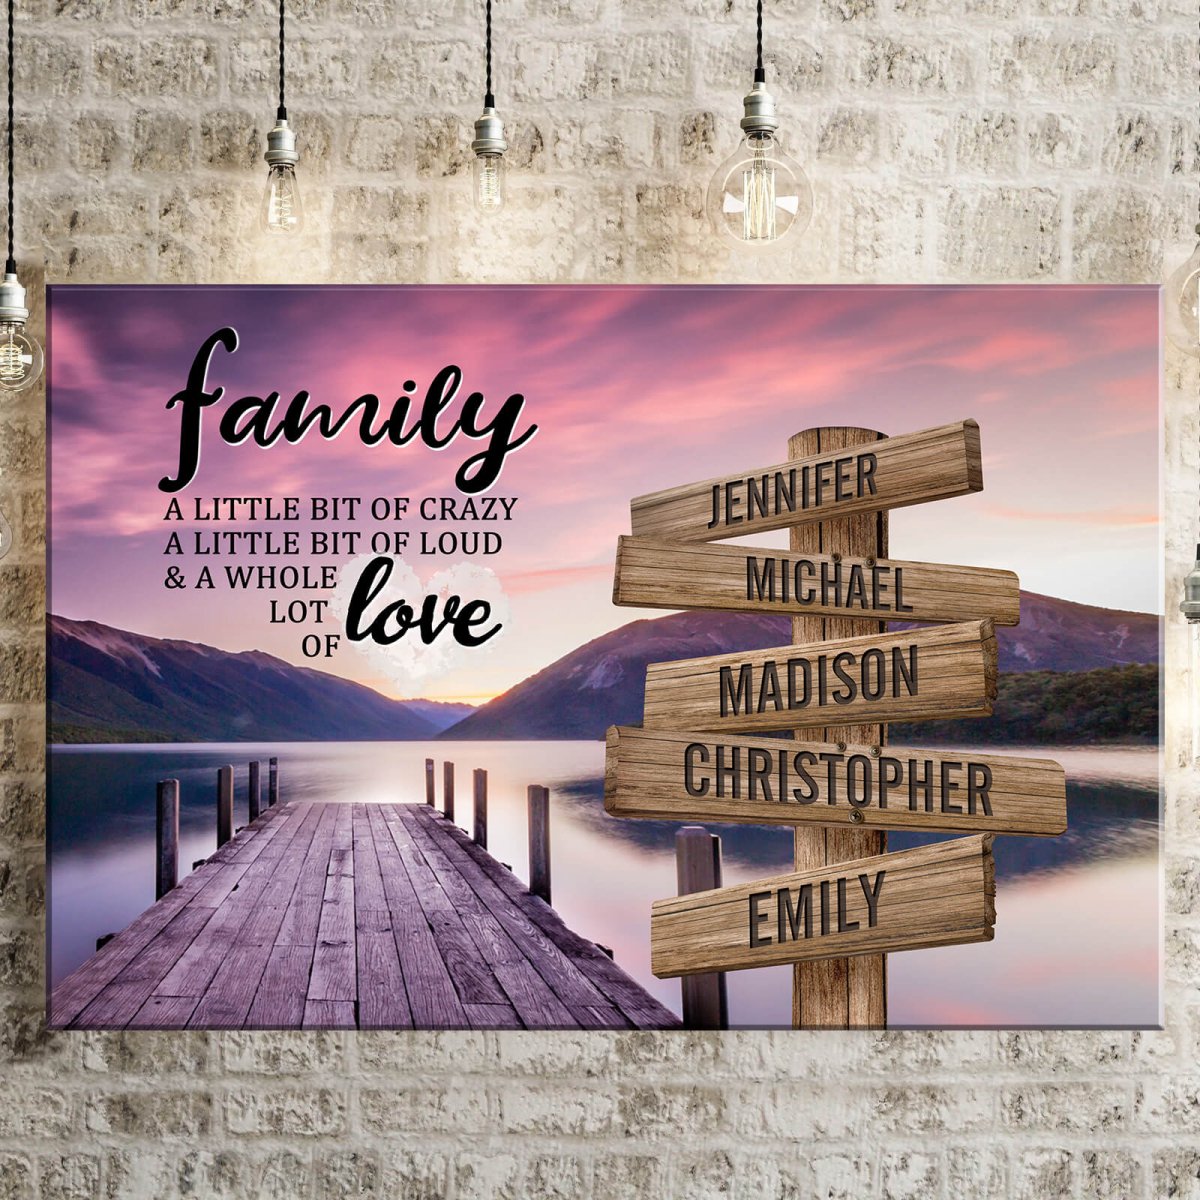 Family - A Little Whole Lot of Love - Personalized Poster - The Next Custom Gift